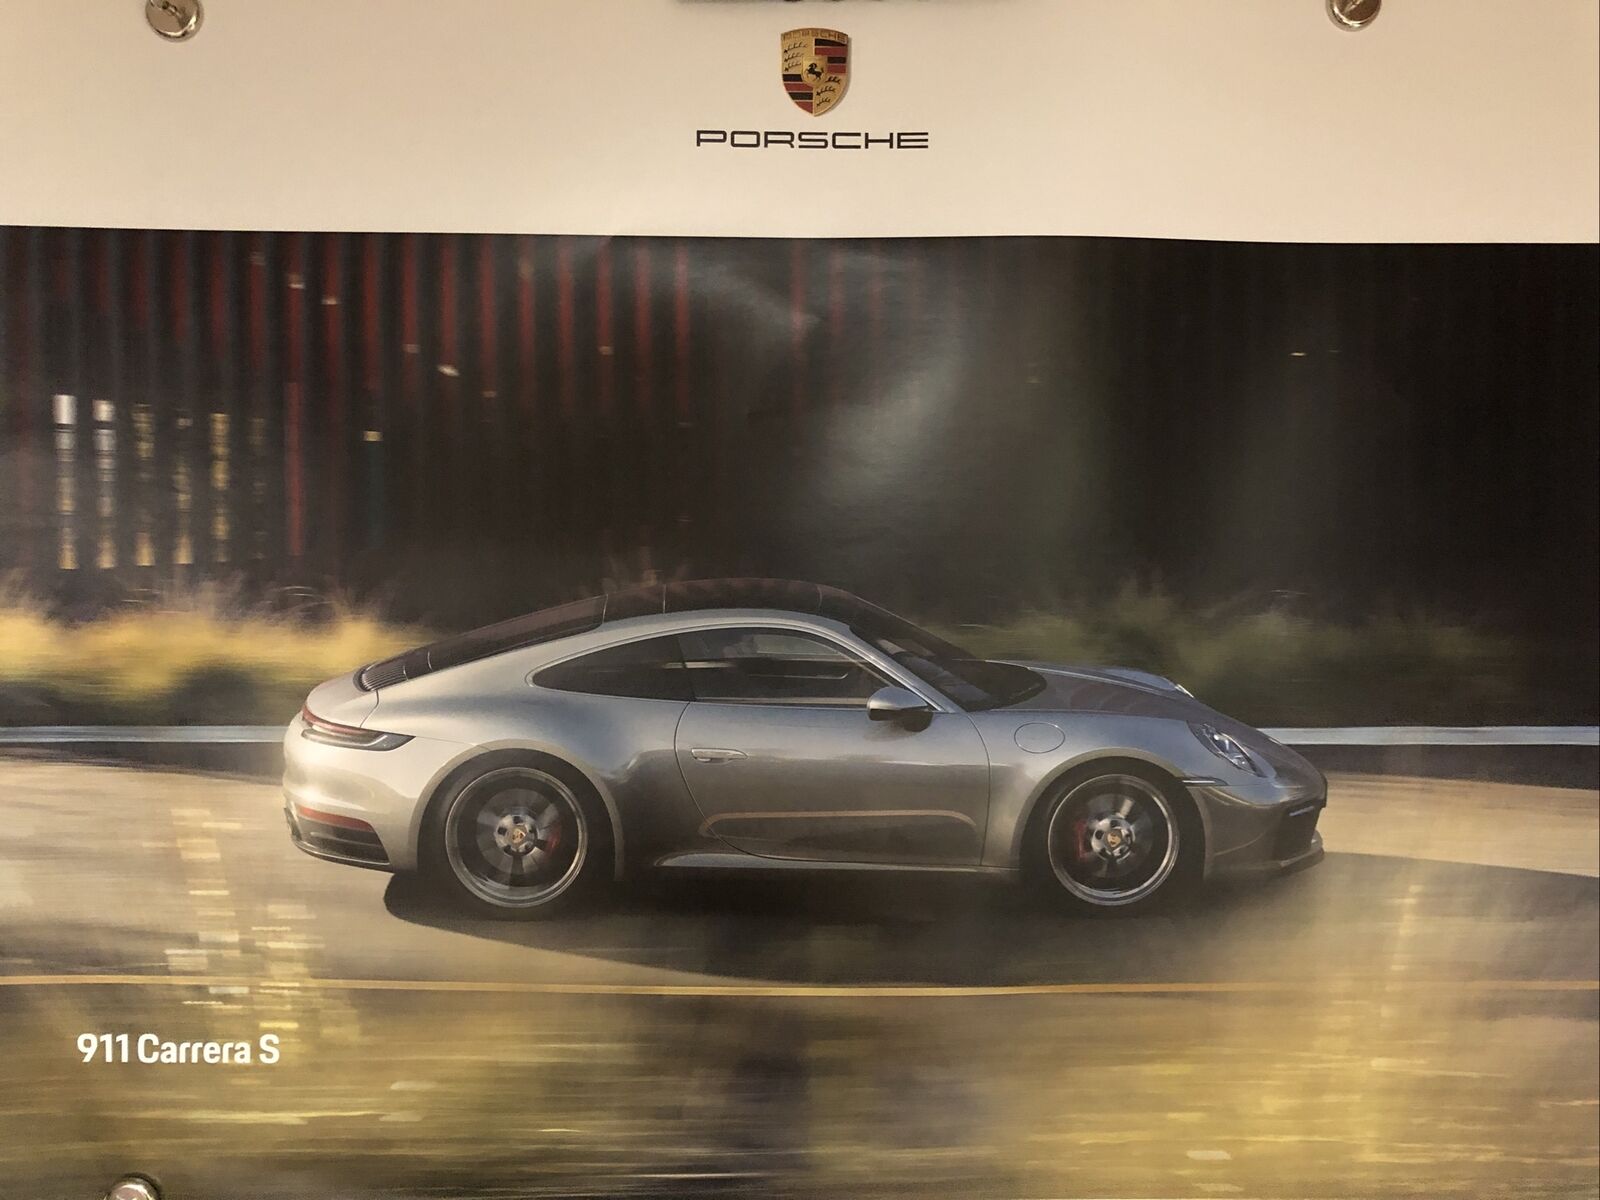 2018 / 2019 Porsche 911 Carrera S Coupe Showroom Advertising Poster RARE Awesome